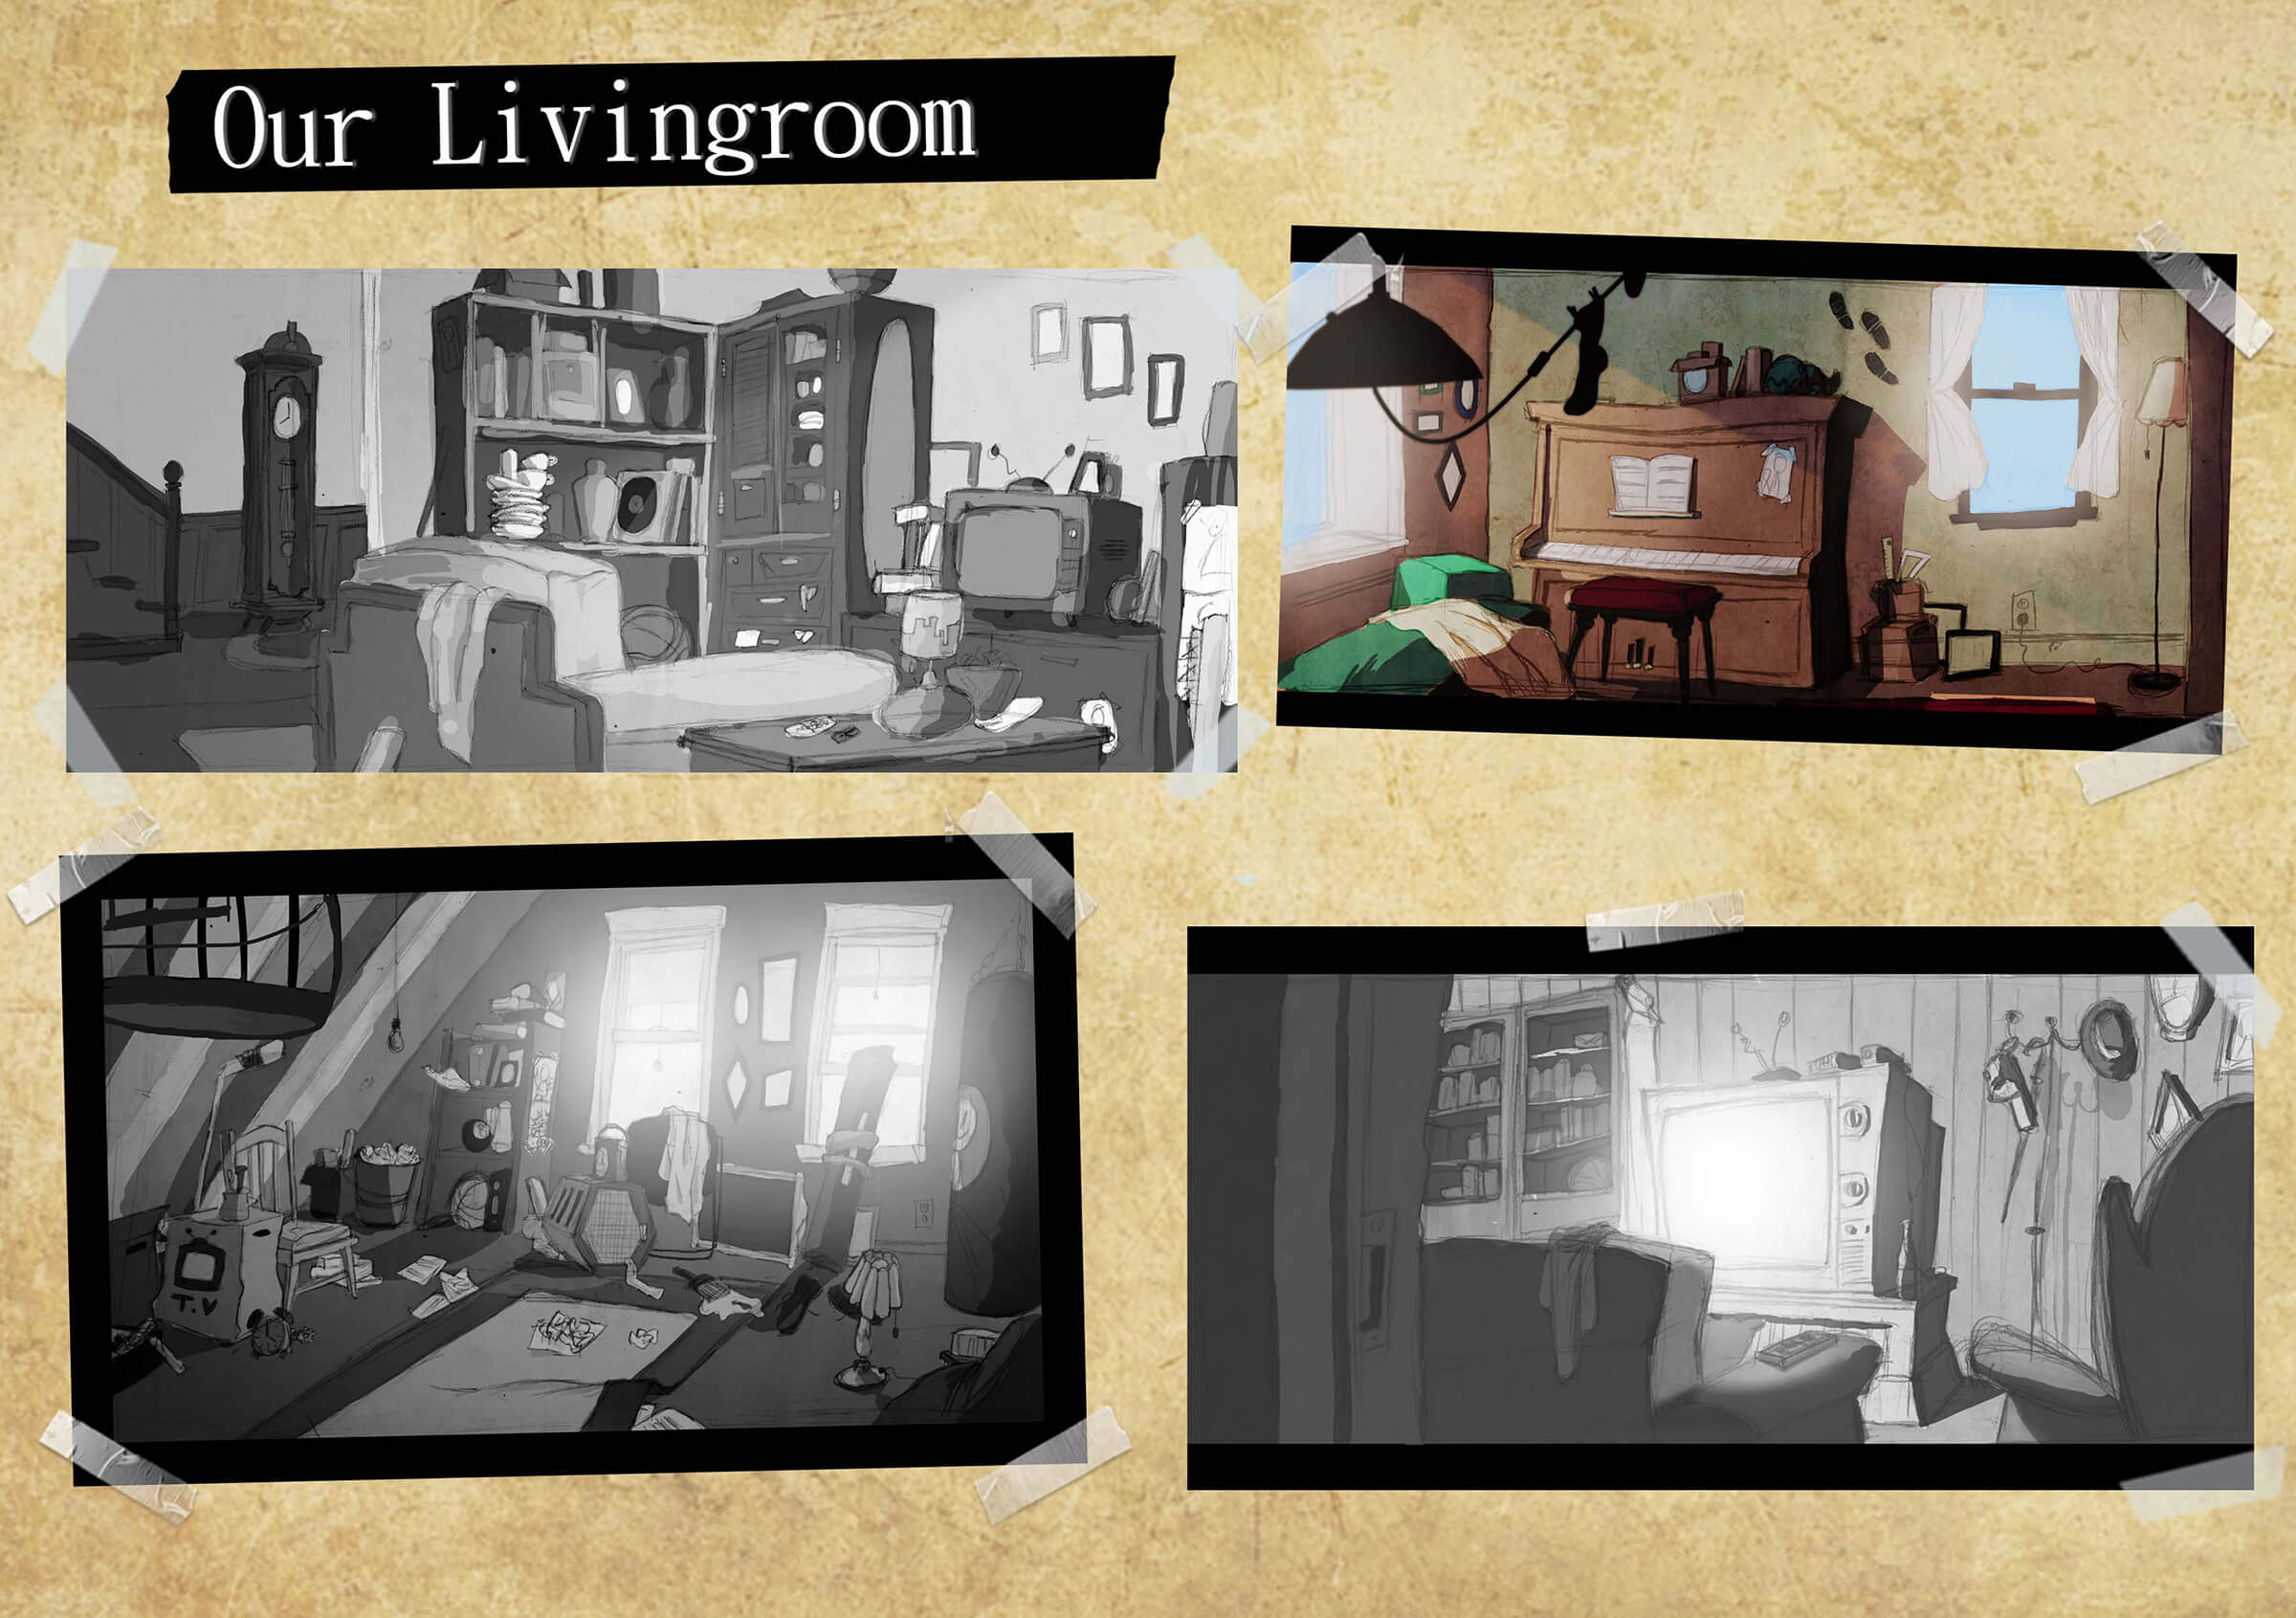 Concept art of a messy living room including a couch, television, upright piano, lamps, a grandfather clock, and shelves.